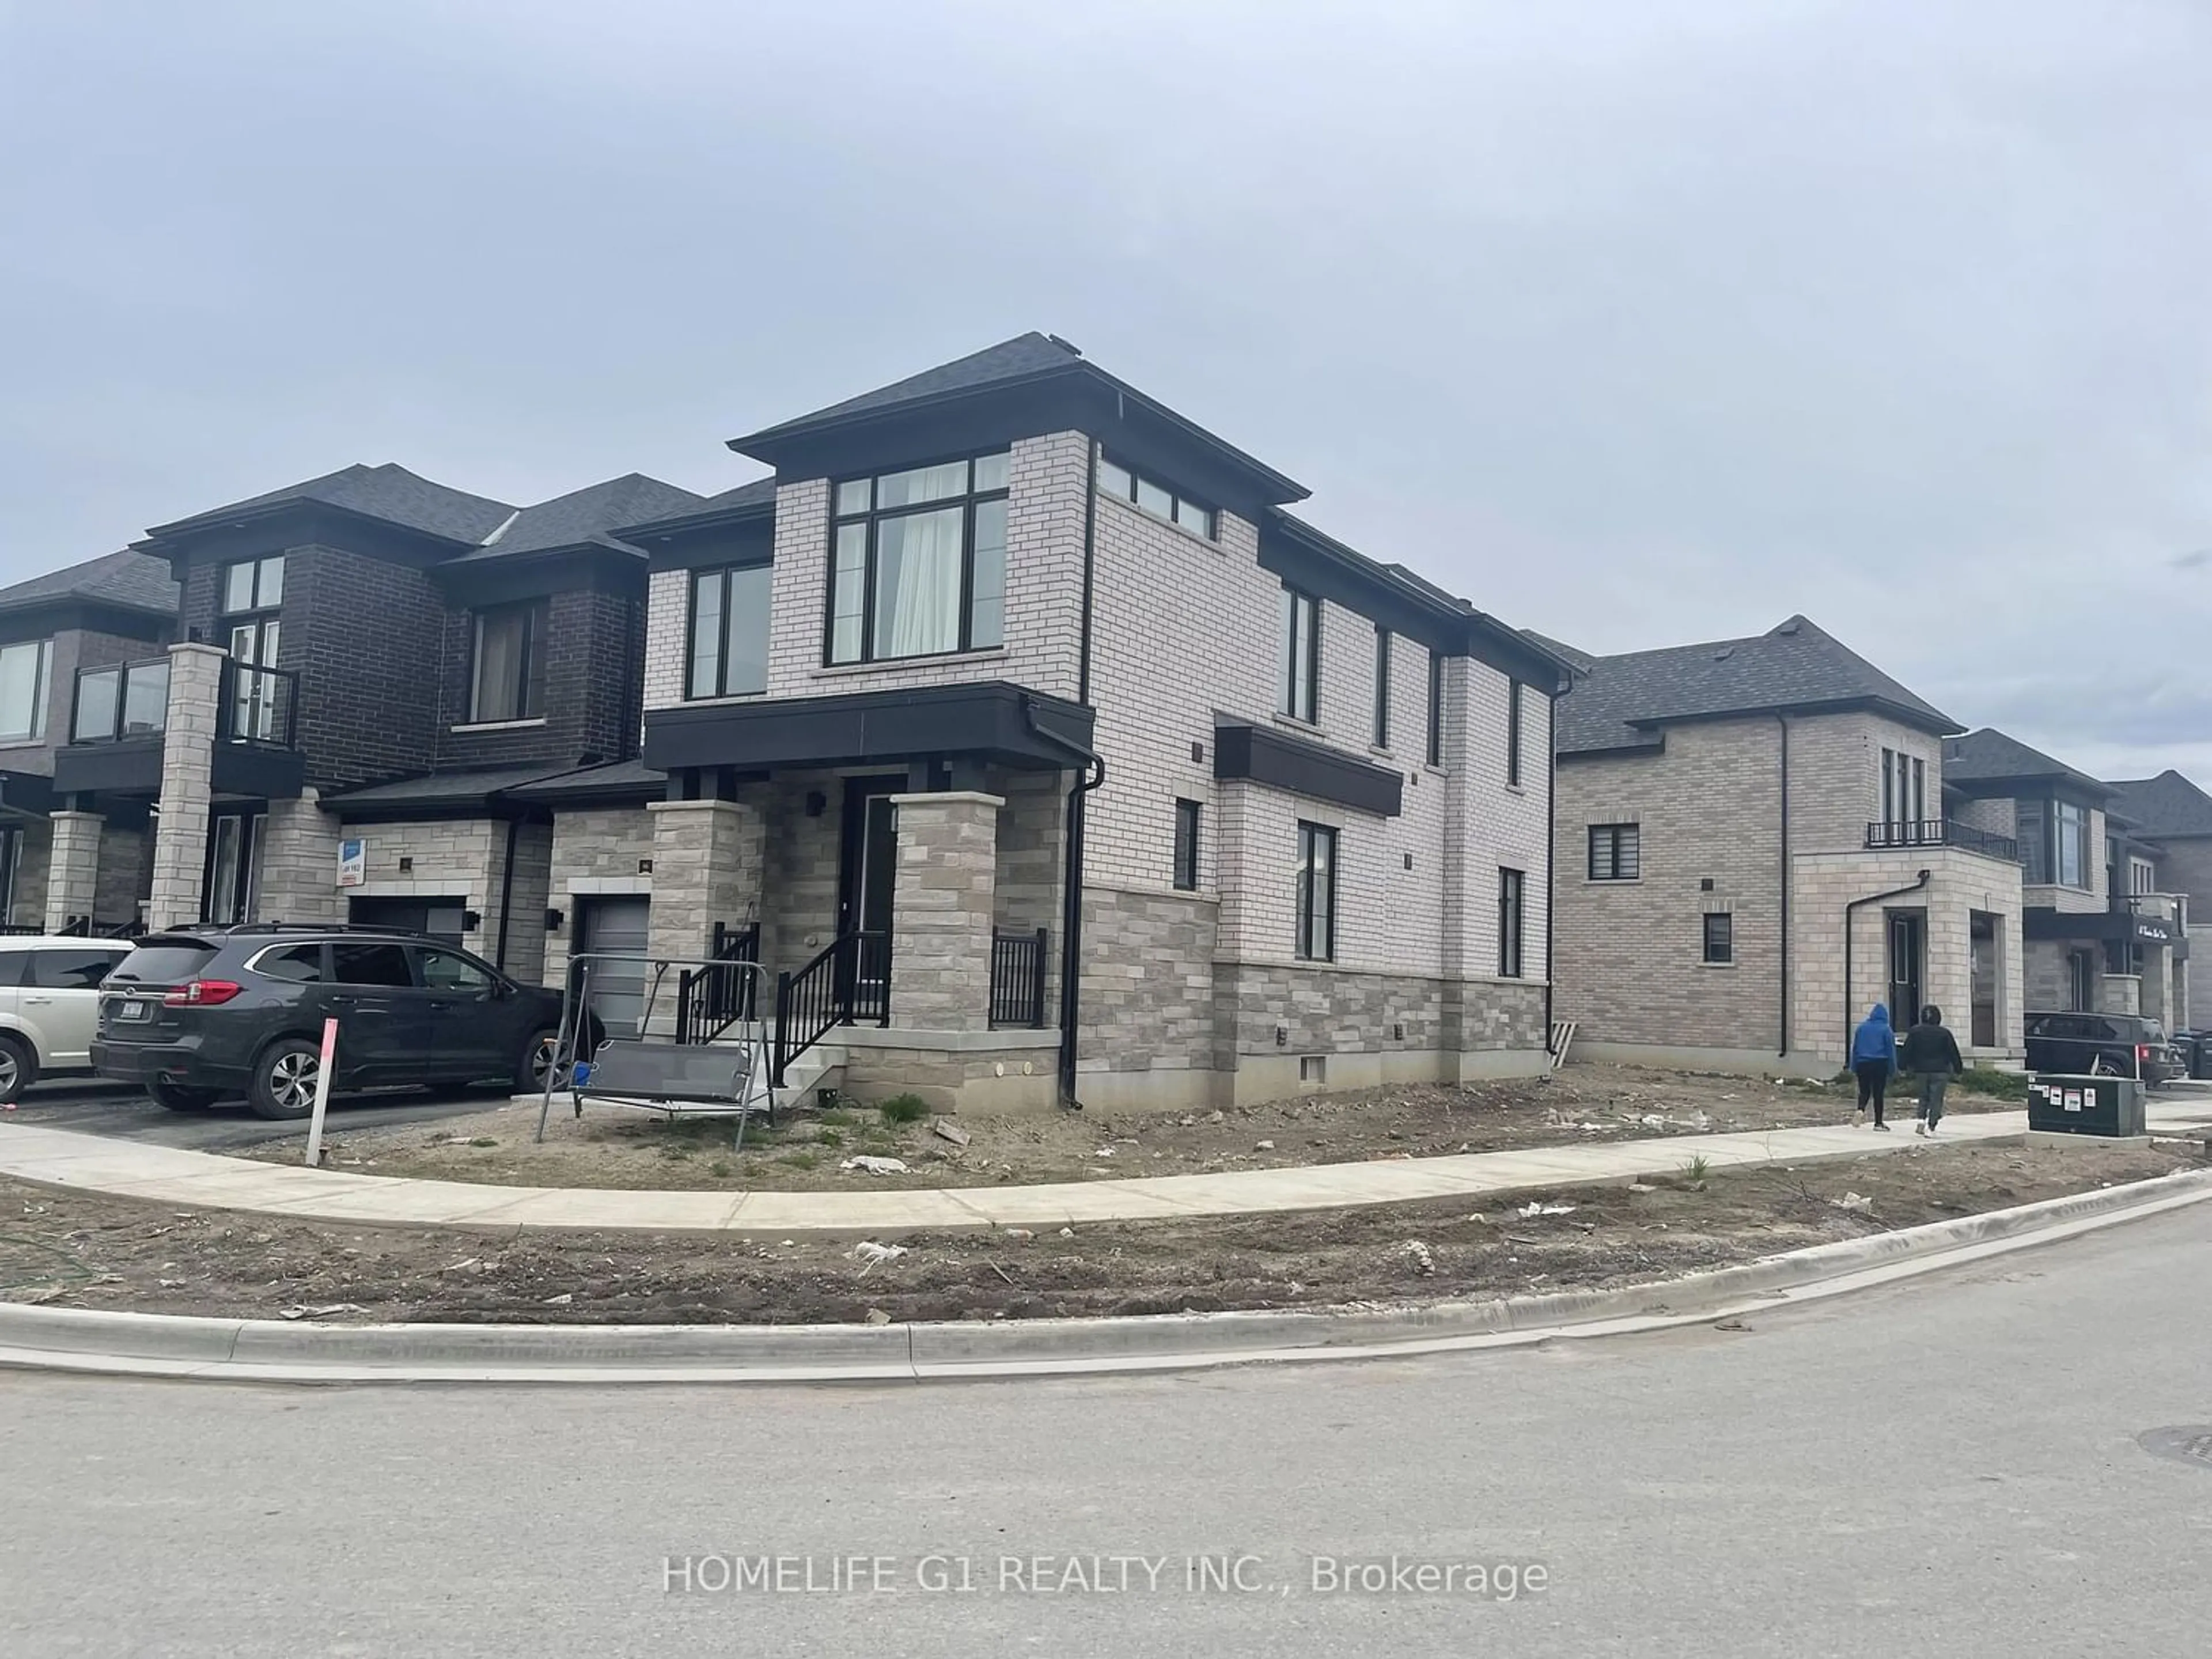 Frontside or backside of a home for 66 Camino Real Dr, Caledon Ontario L7C 4L9